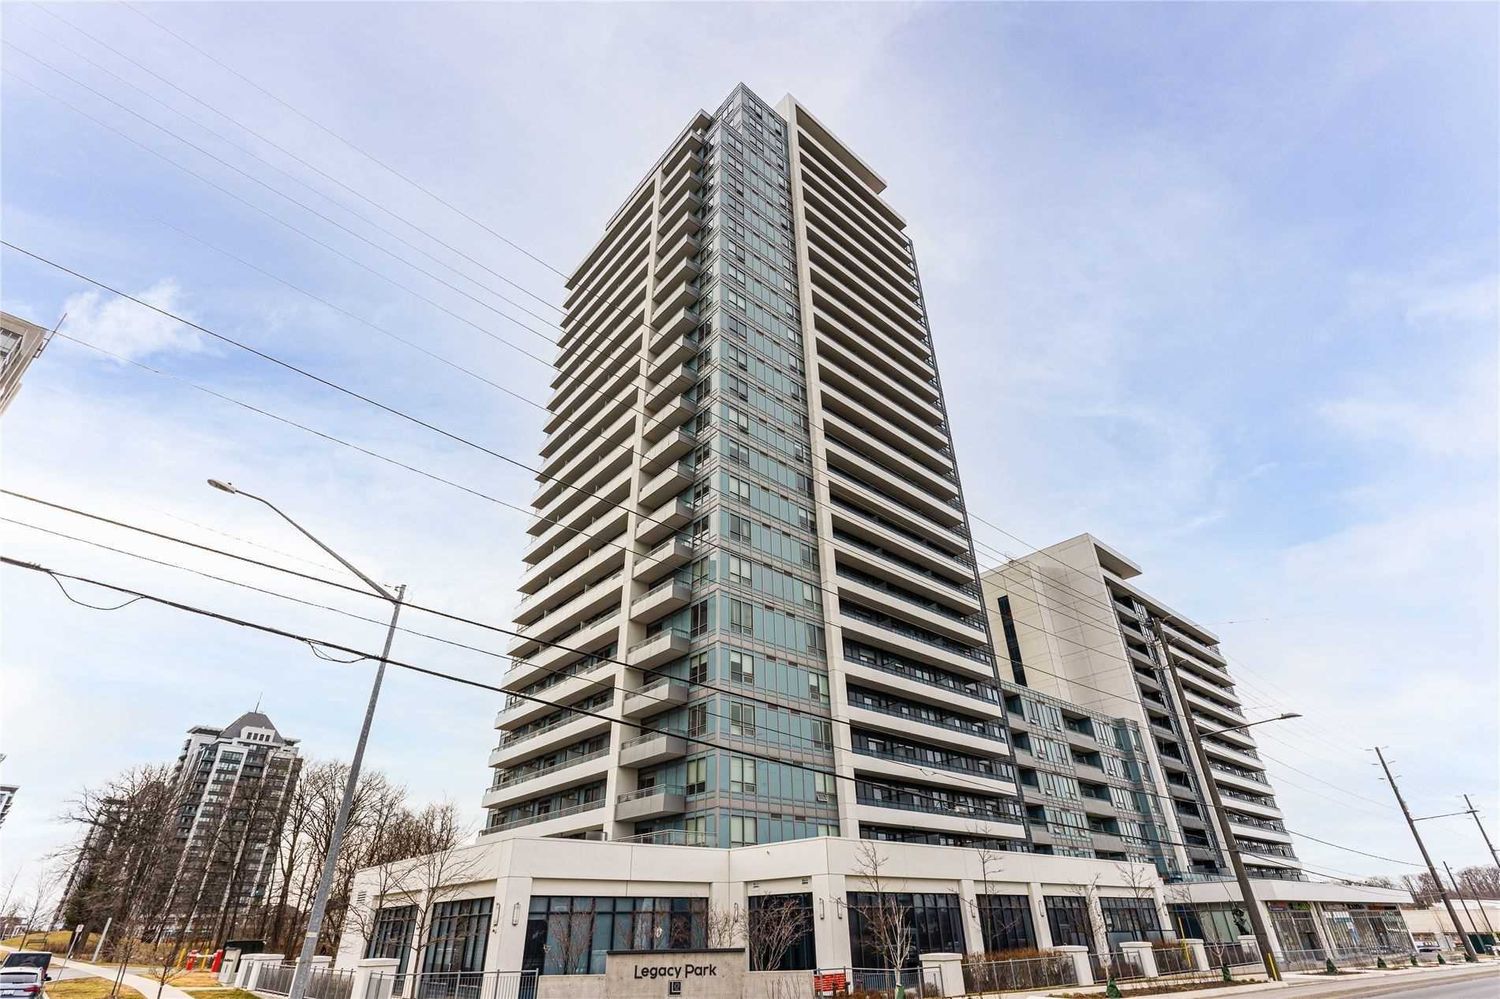 7890 Bathurst Street. Legacy Park Condos is located in  Vaughan, Toronto - image #2 of 3